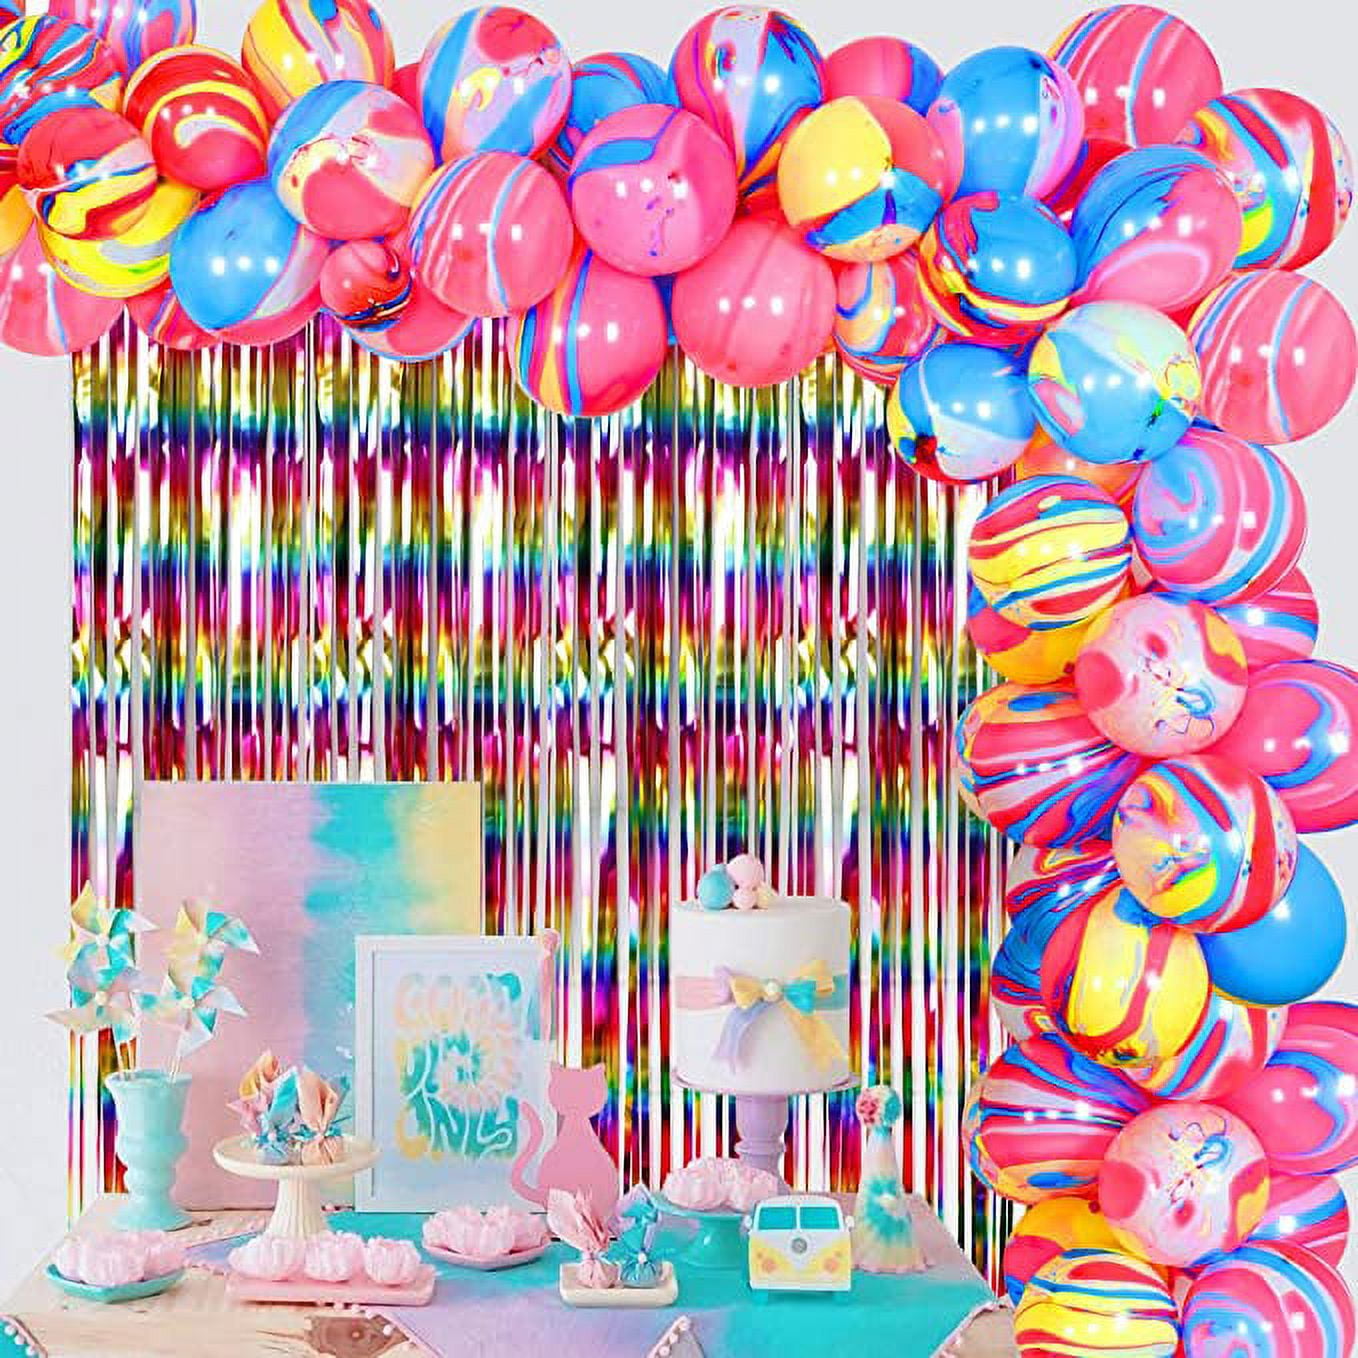 Tie Dye Party Decorations for Girls Birthday - Balloon Garland for ...